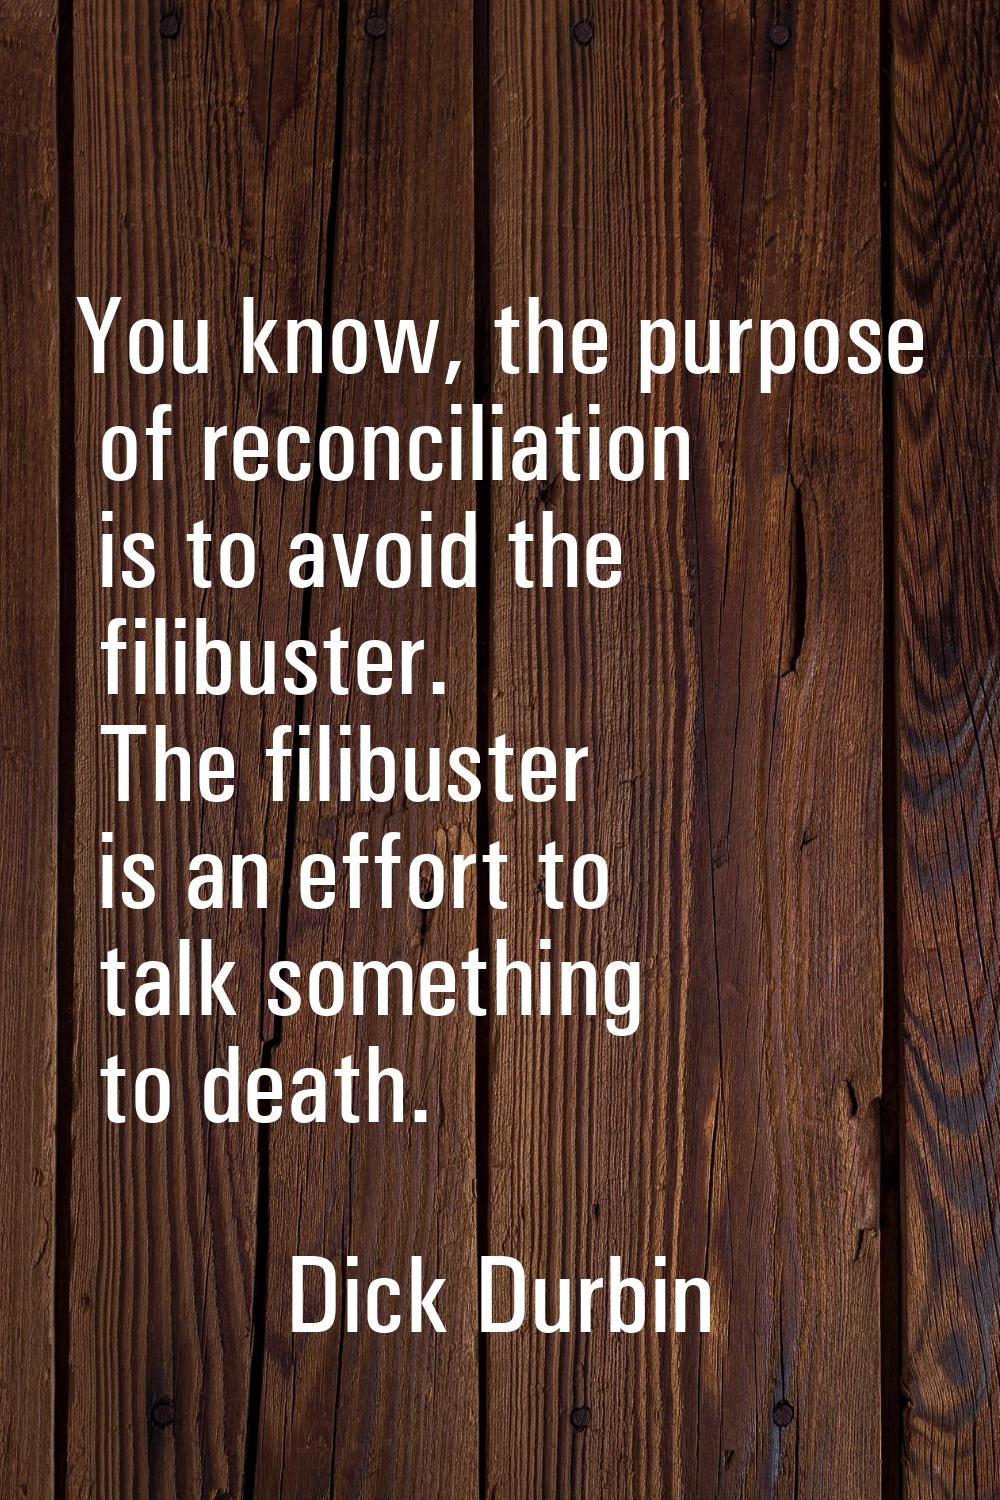 You know, the purpose of reconciliation is to avoid the filibuster. The filibuster is an effort to 